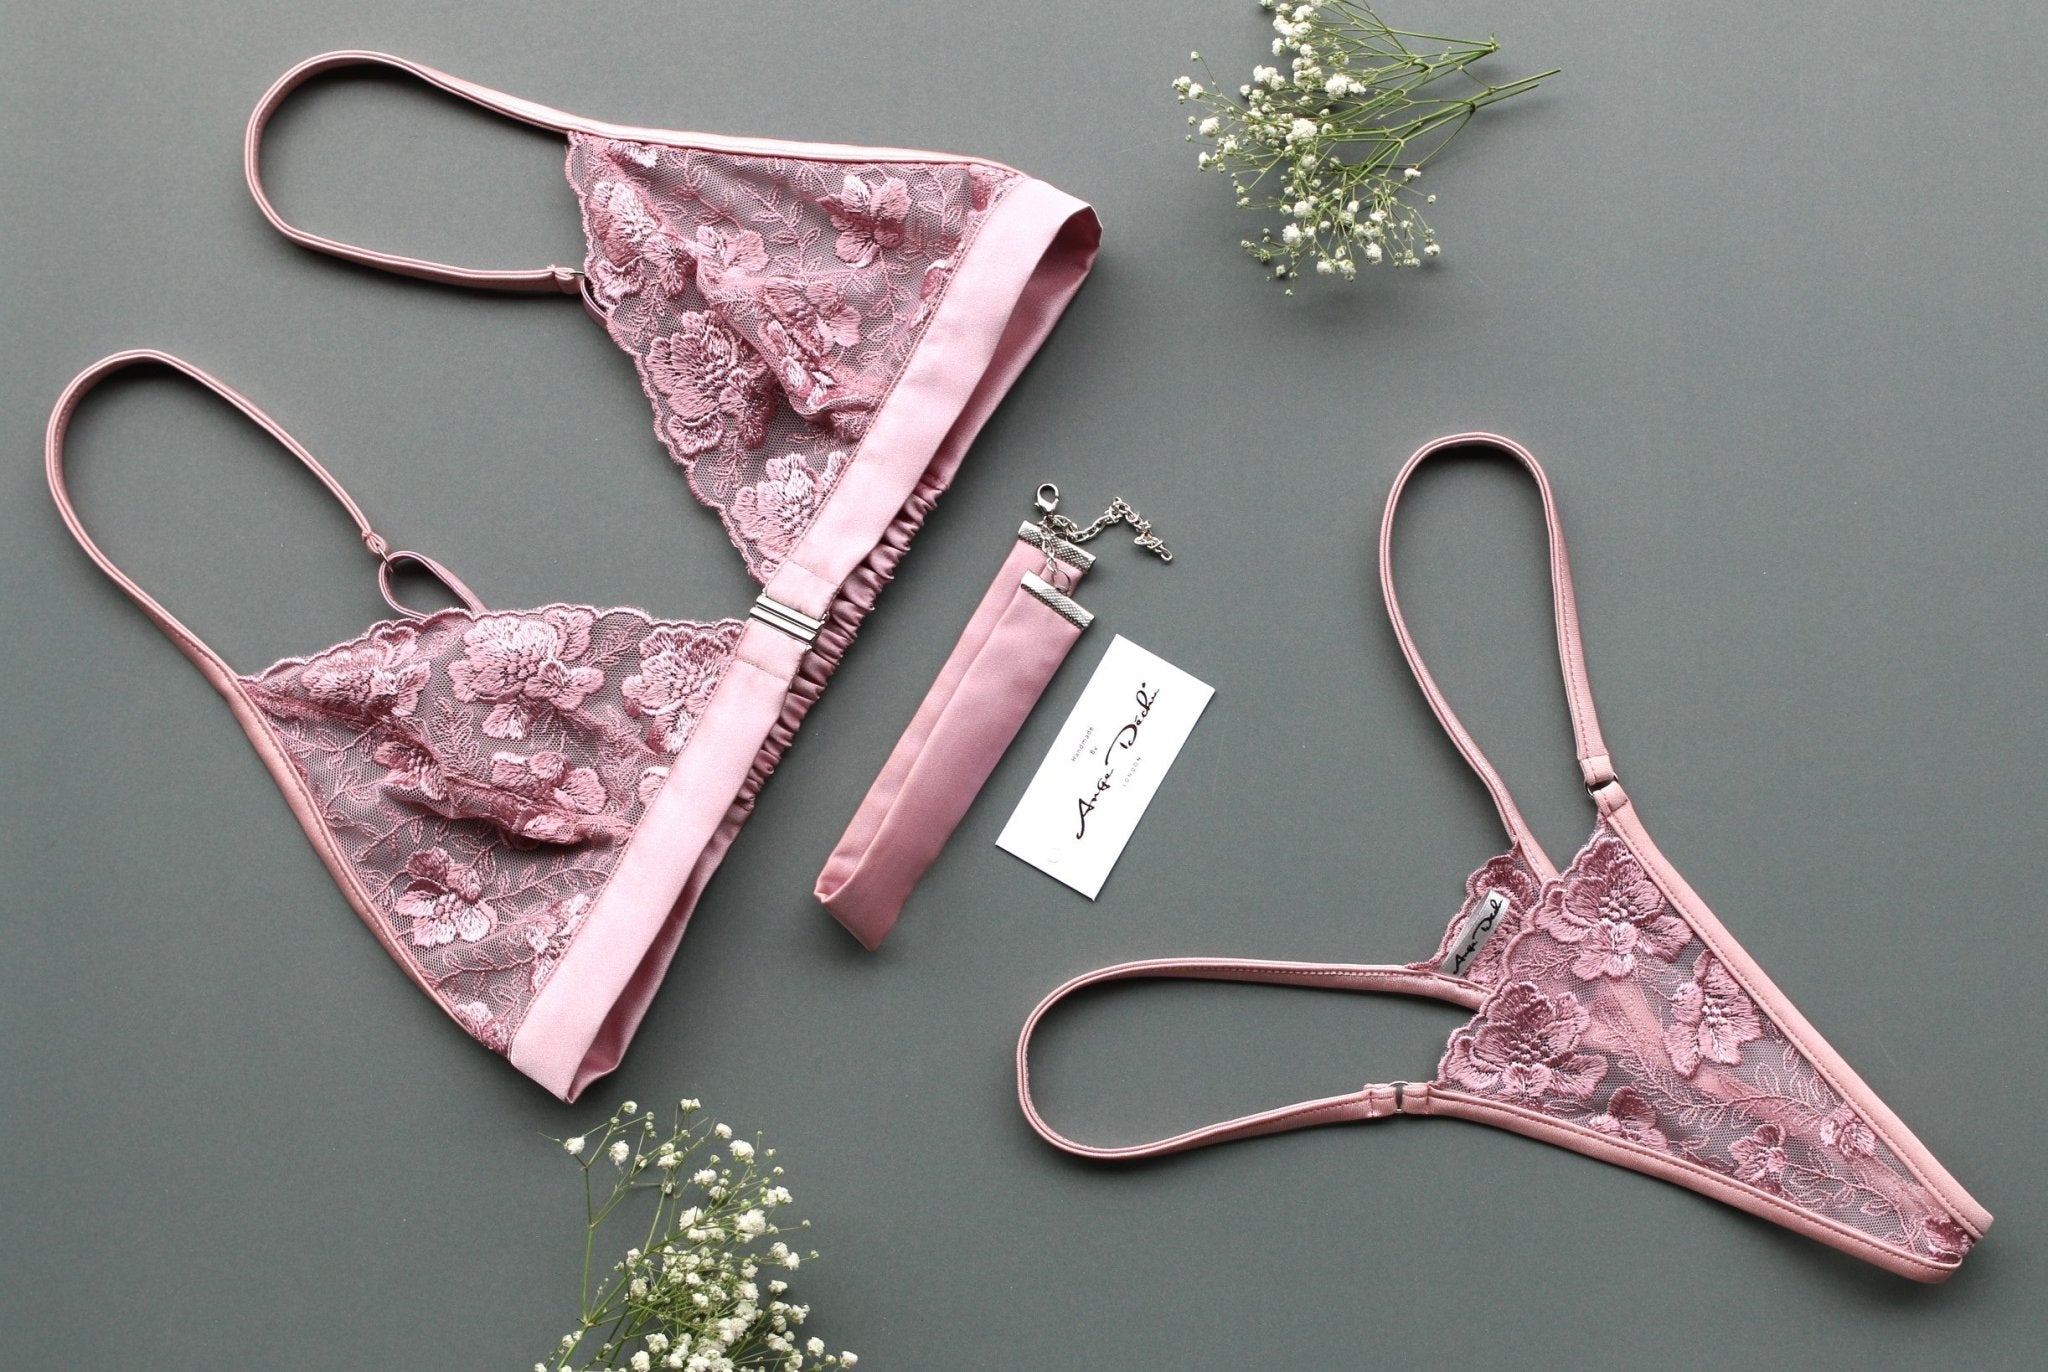 Sheer lingerie set, G string panties bralette and choker in see through pink lace sexy sheer lingerie - Ange Déchu